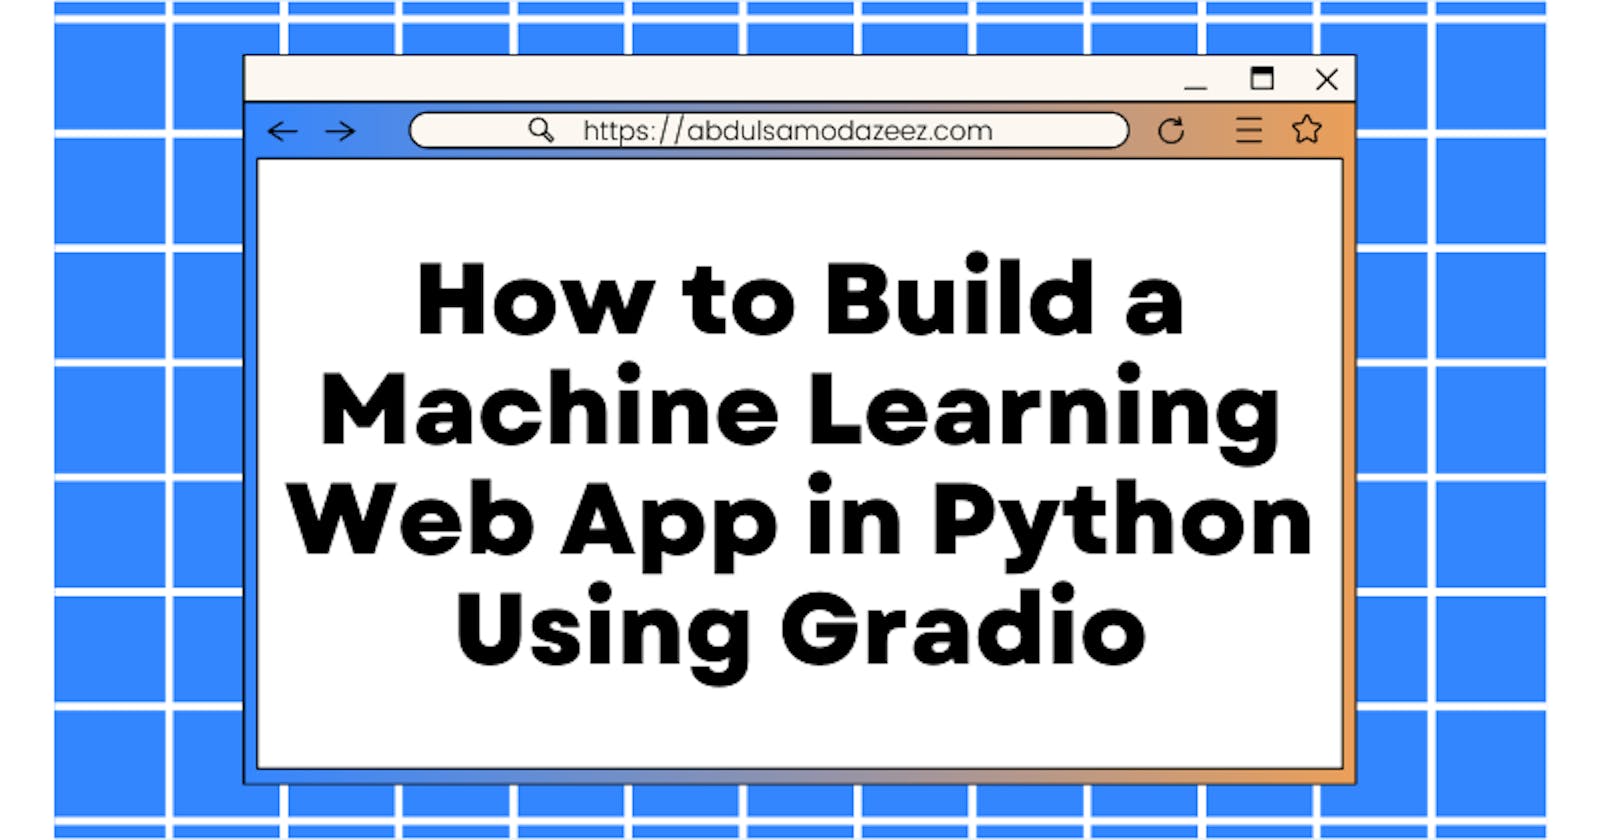 How to Build a Machine Learning Web App in Python Using Gradio